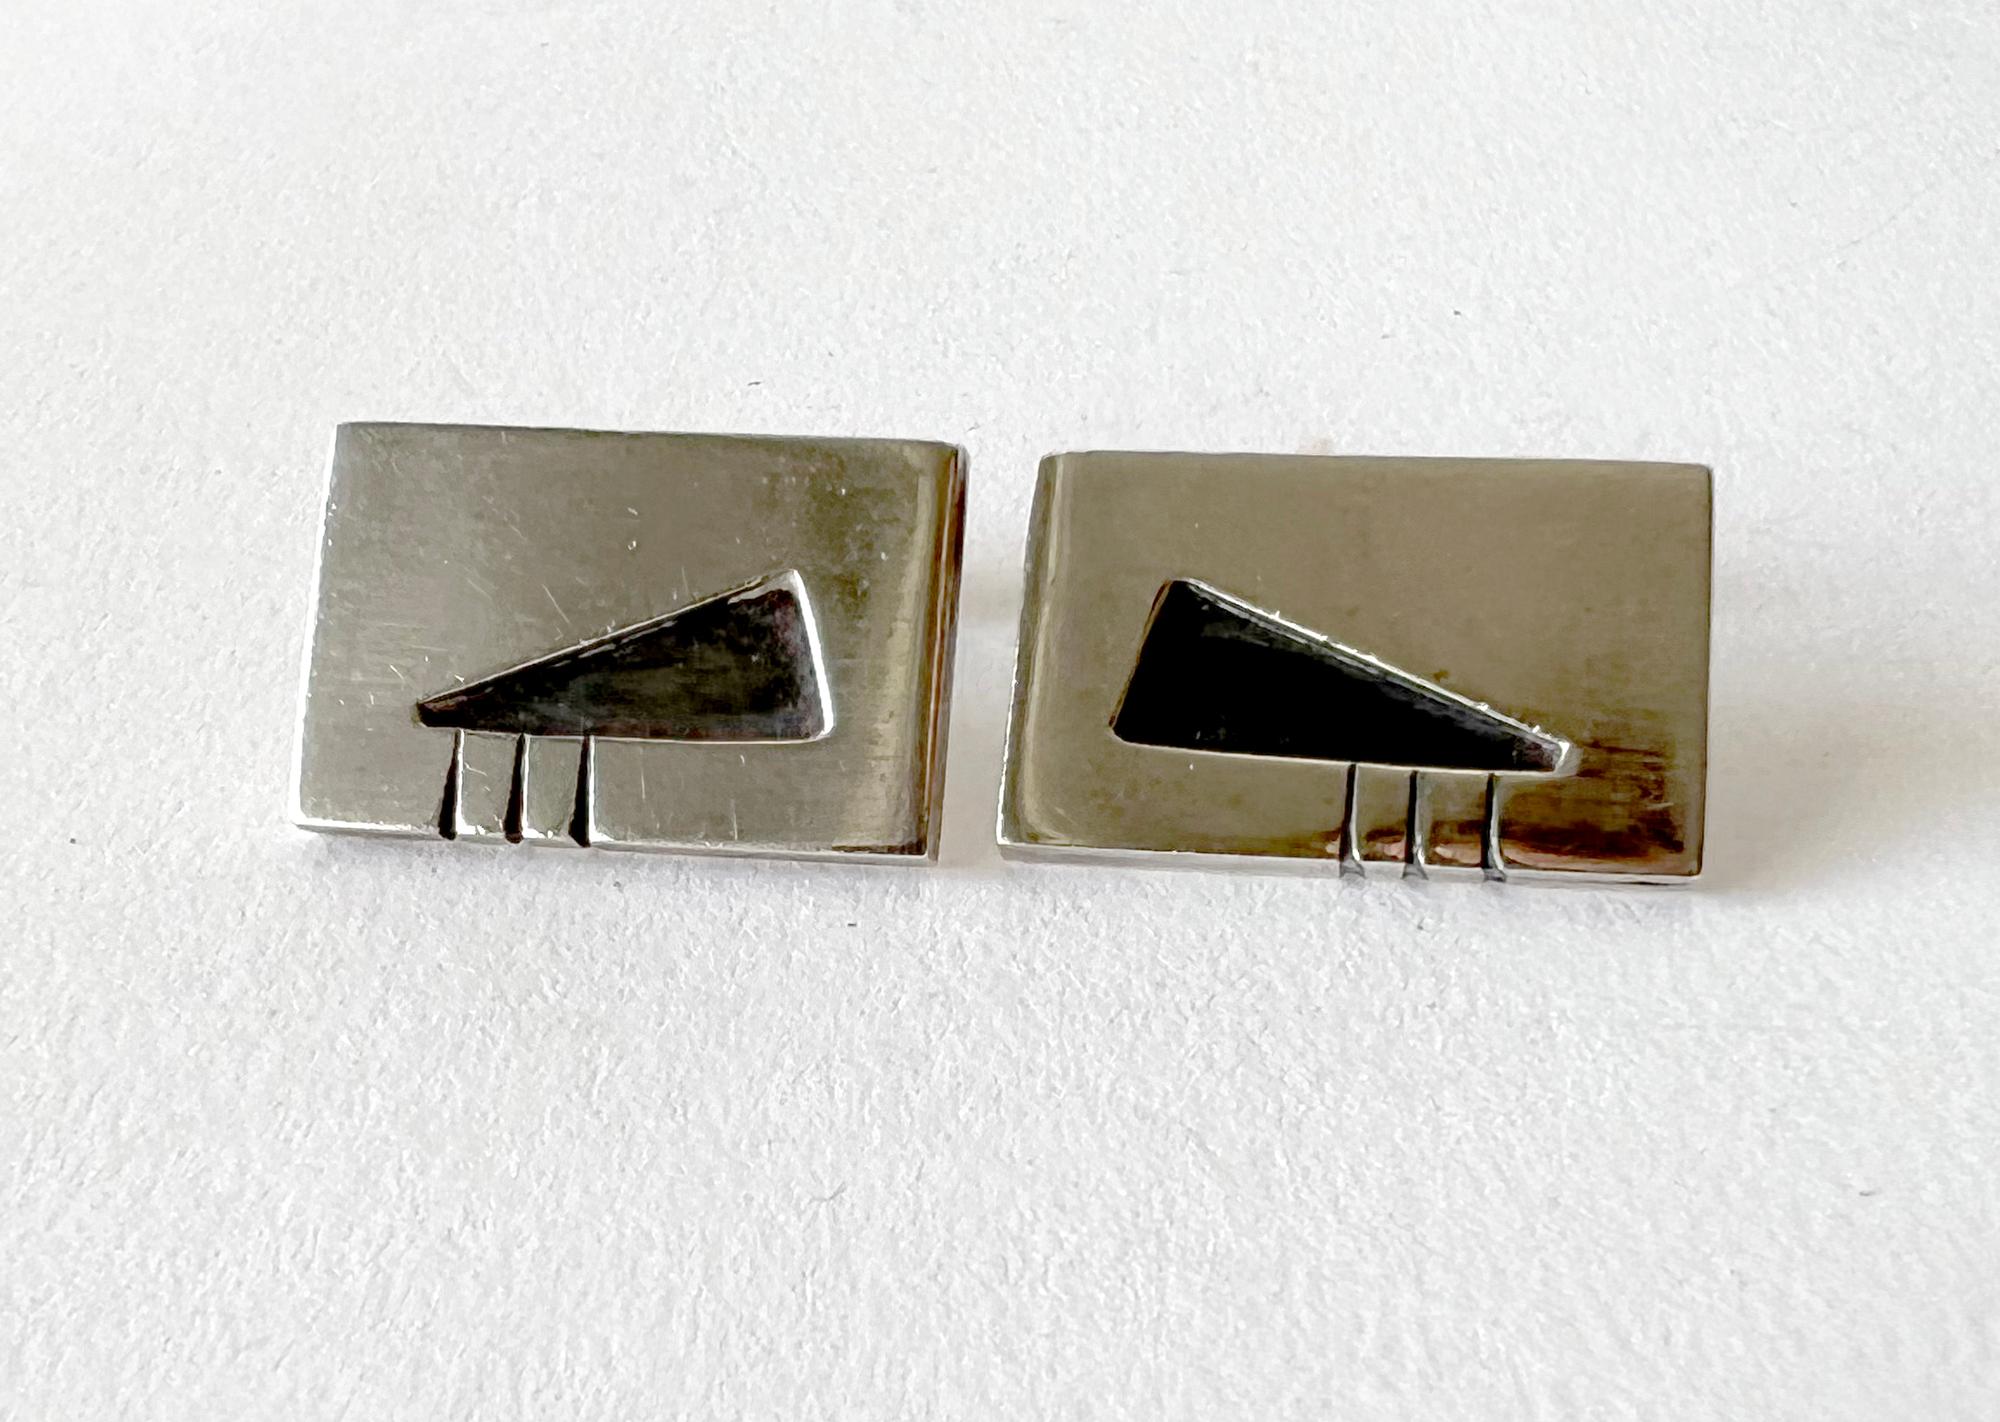 1950s Phyllis Sklar American Modernist Sterling Silver Cufflinks In Good Condition For Sale In Palm Springs, CA